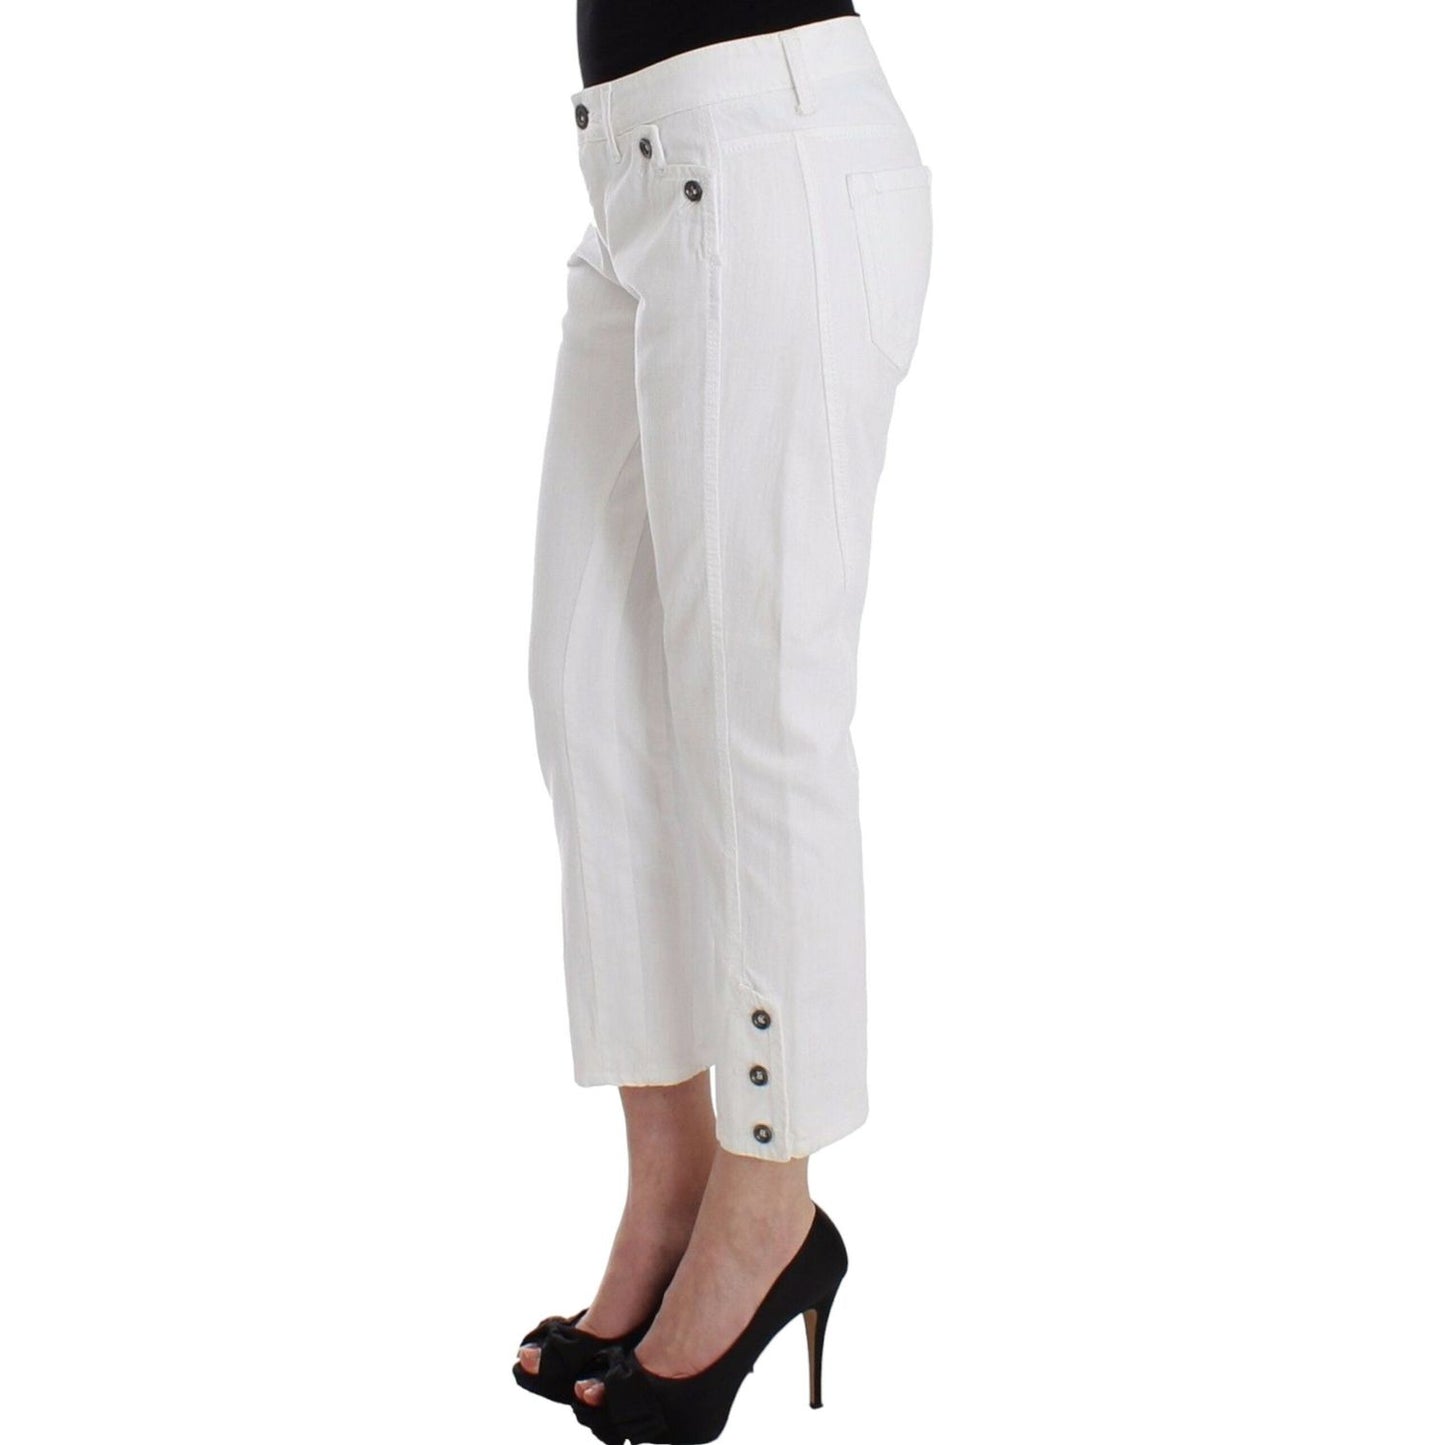 Ermanno Scervino | Chic White Cropped Jeans for Sophisticated Style| McRichard Designer Brands   